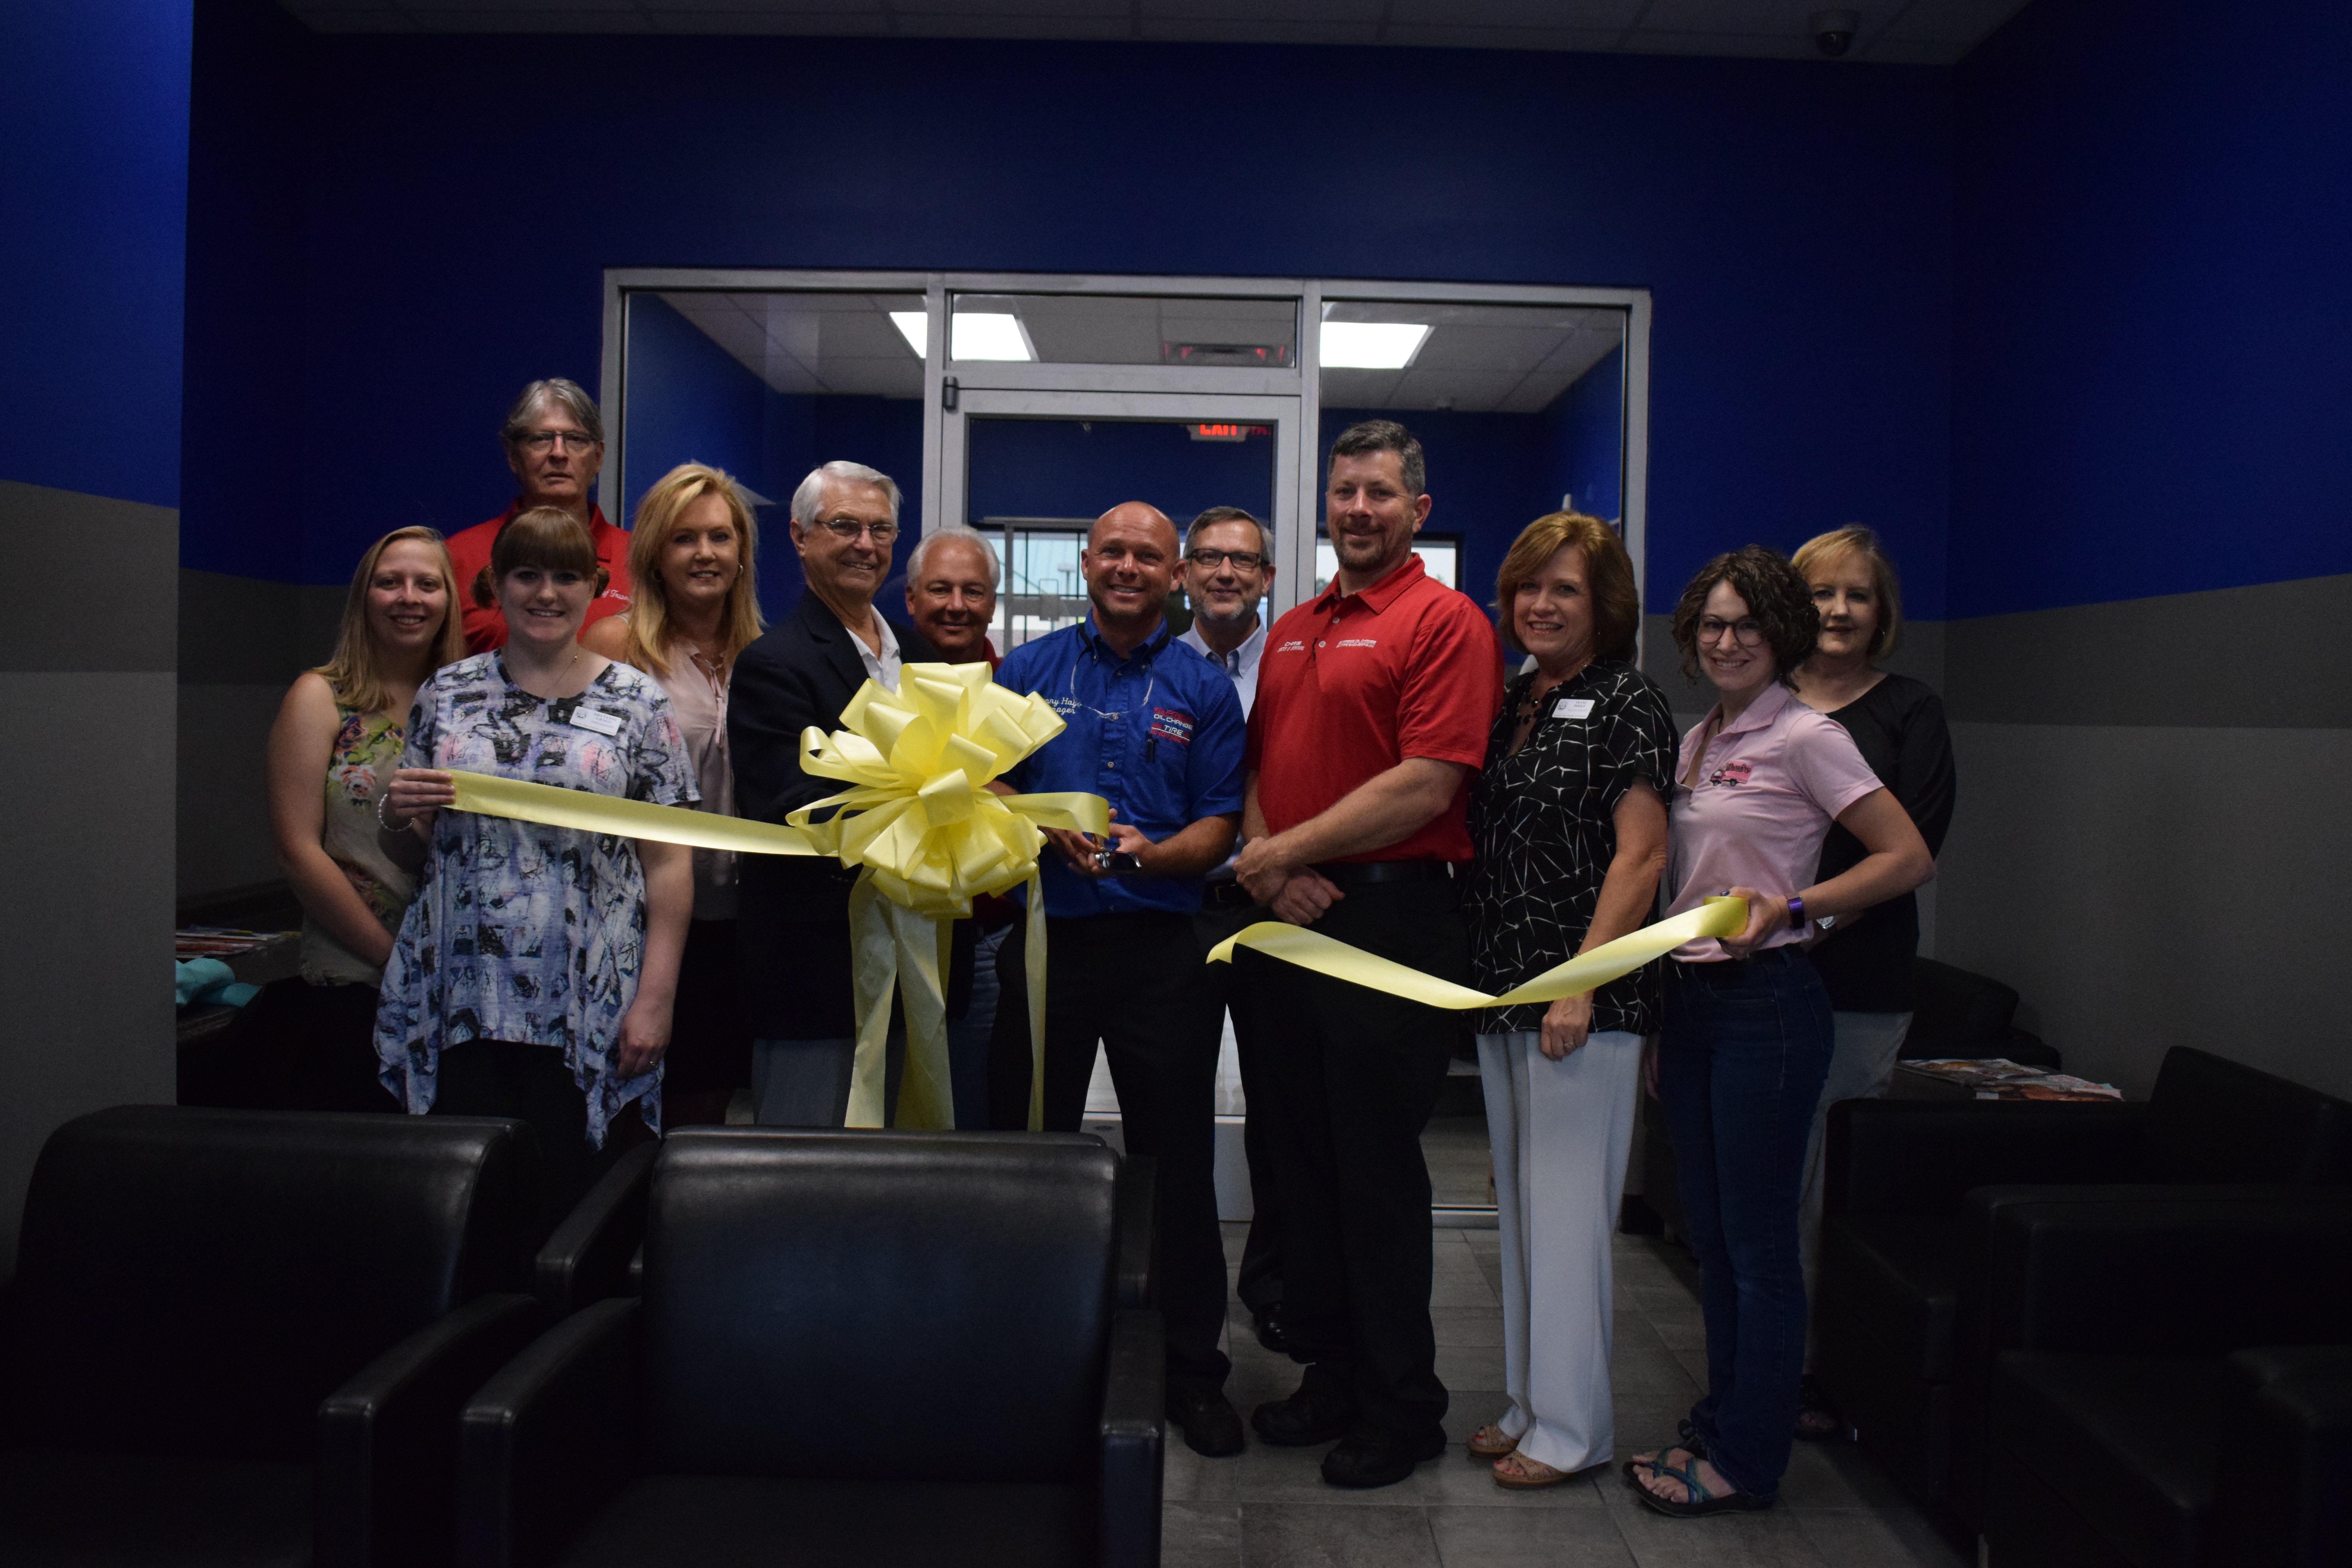 Gala held to celebrate improvements at Express Oil Change in Trussville